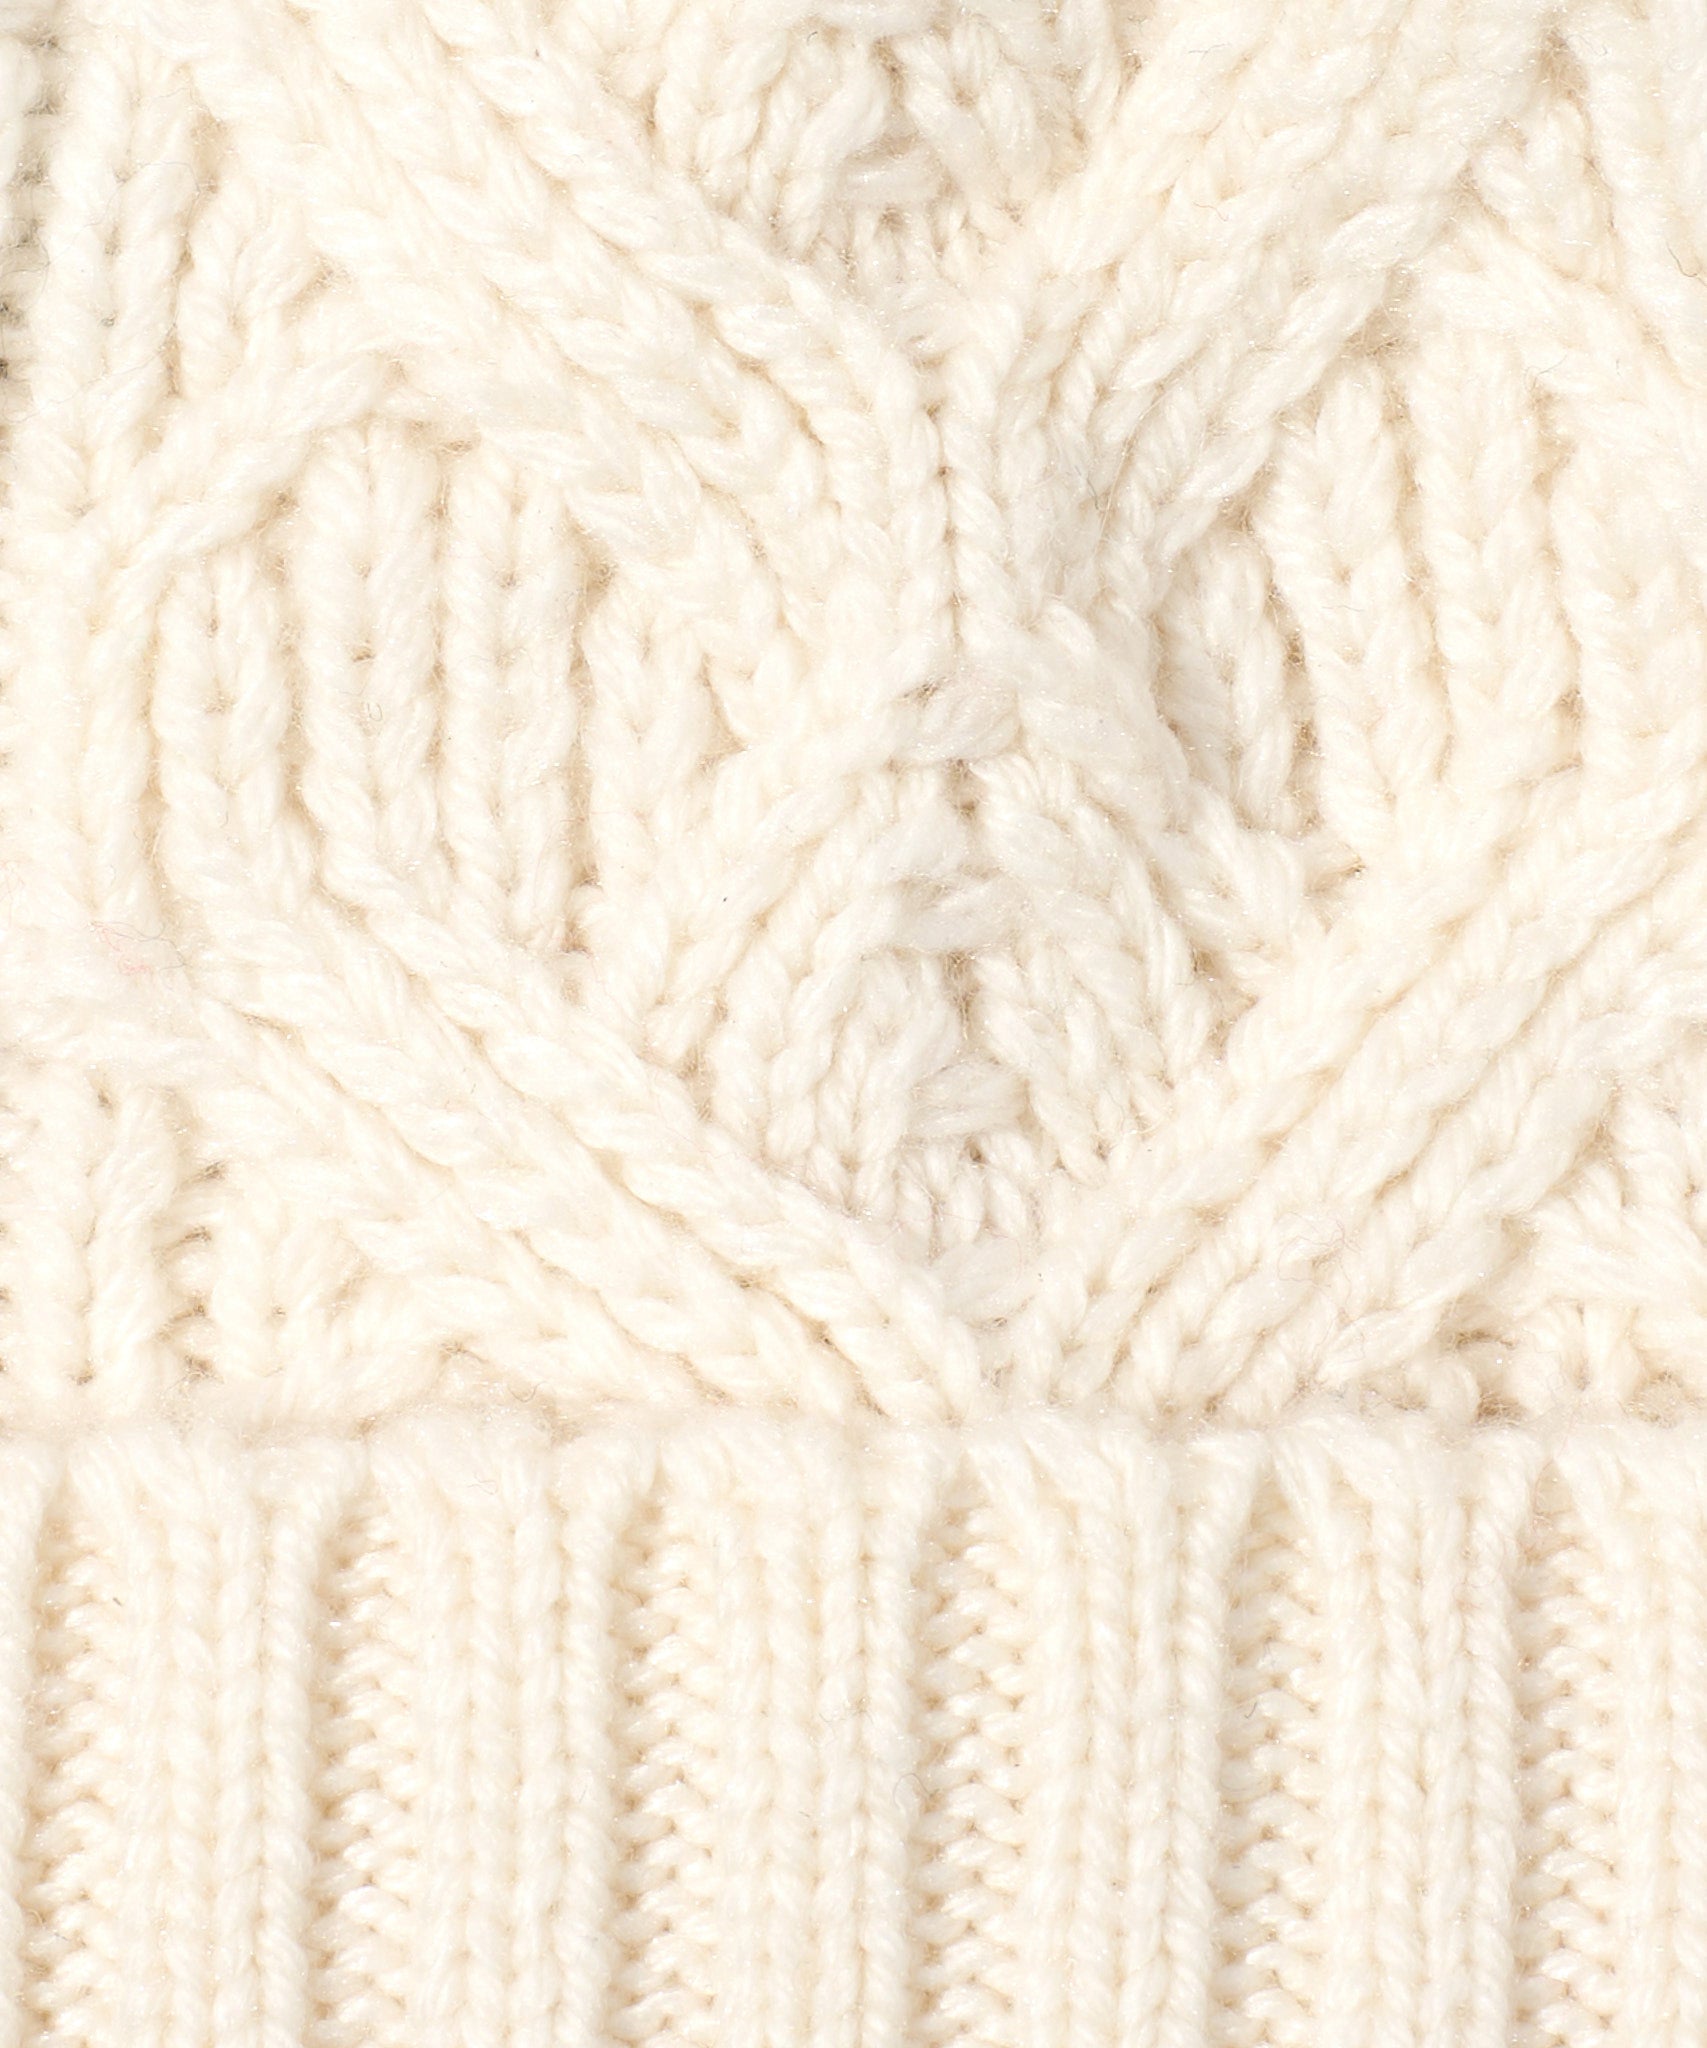 Loopy Cable Pom Hat in color Ivory